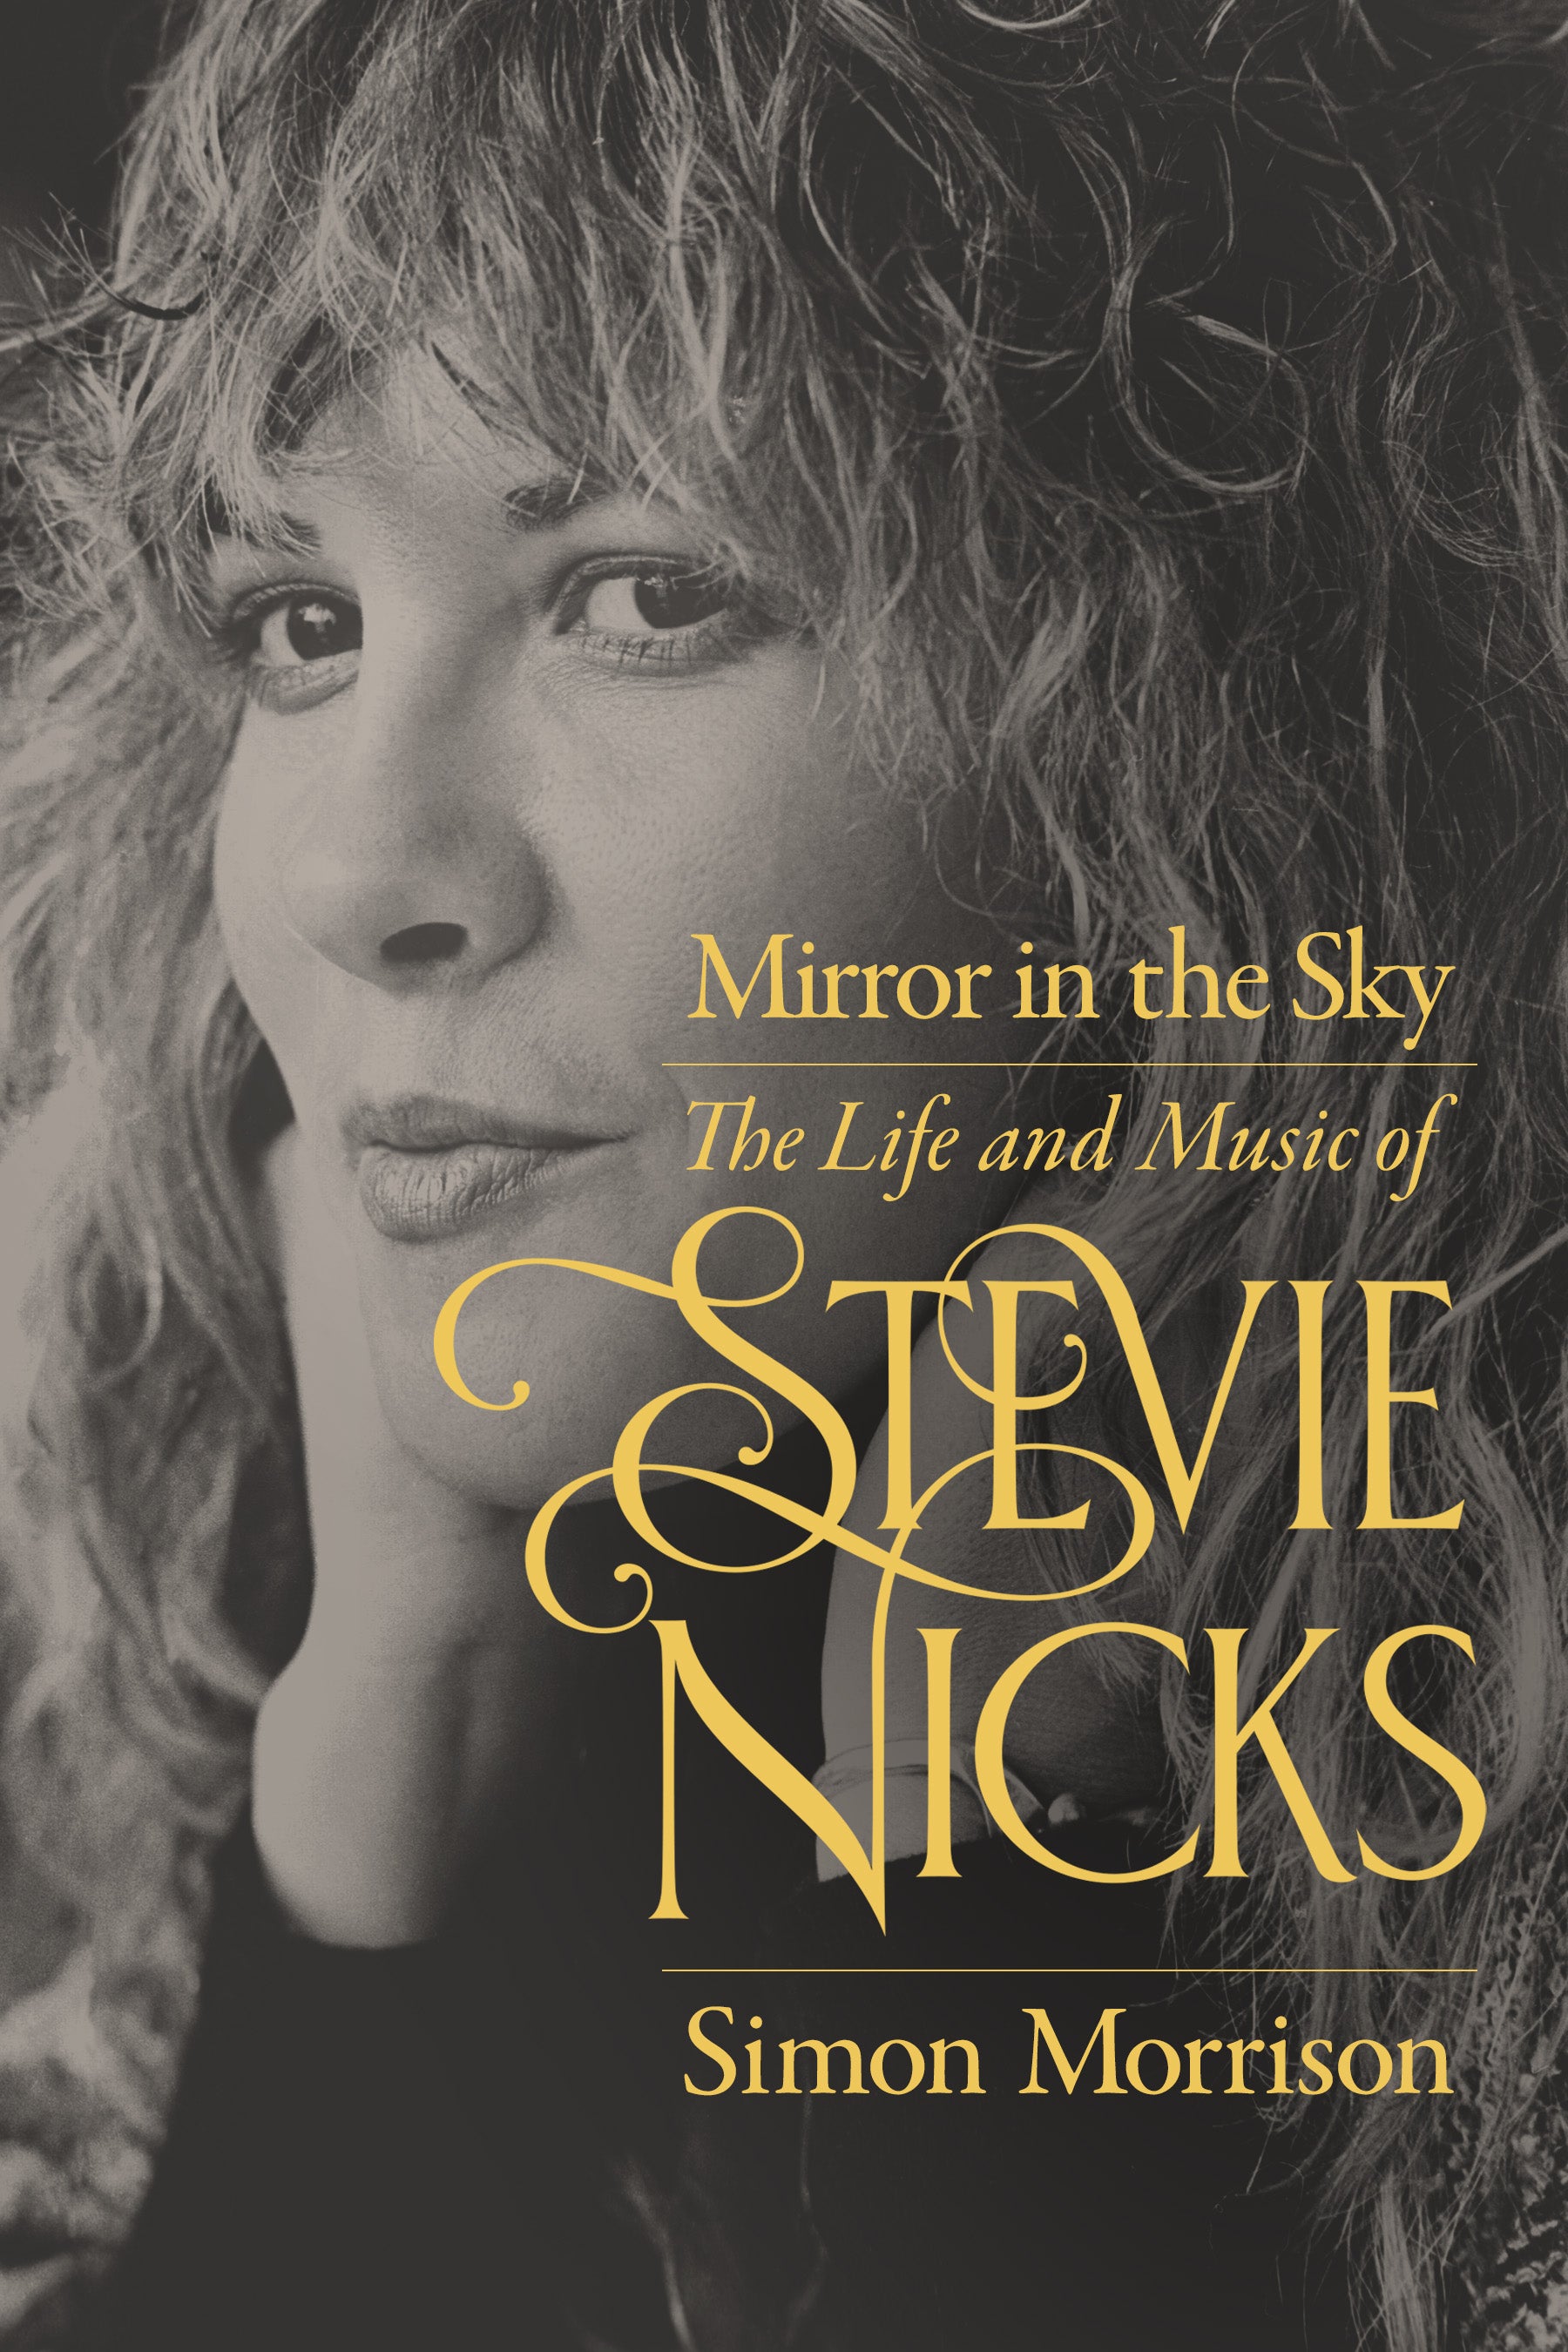 Mirror in the Sky cover: a close-up of Stevie Nicks resting her hands on her cheeks looking off past the camera with a slight smile.